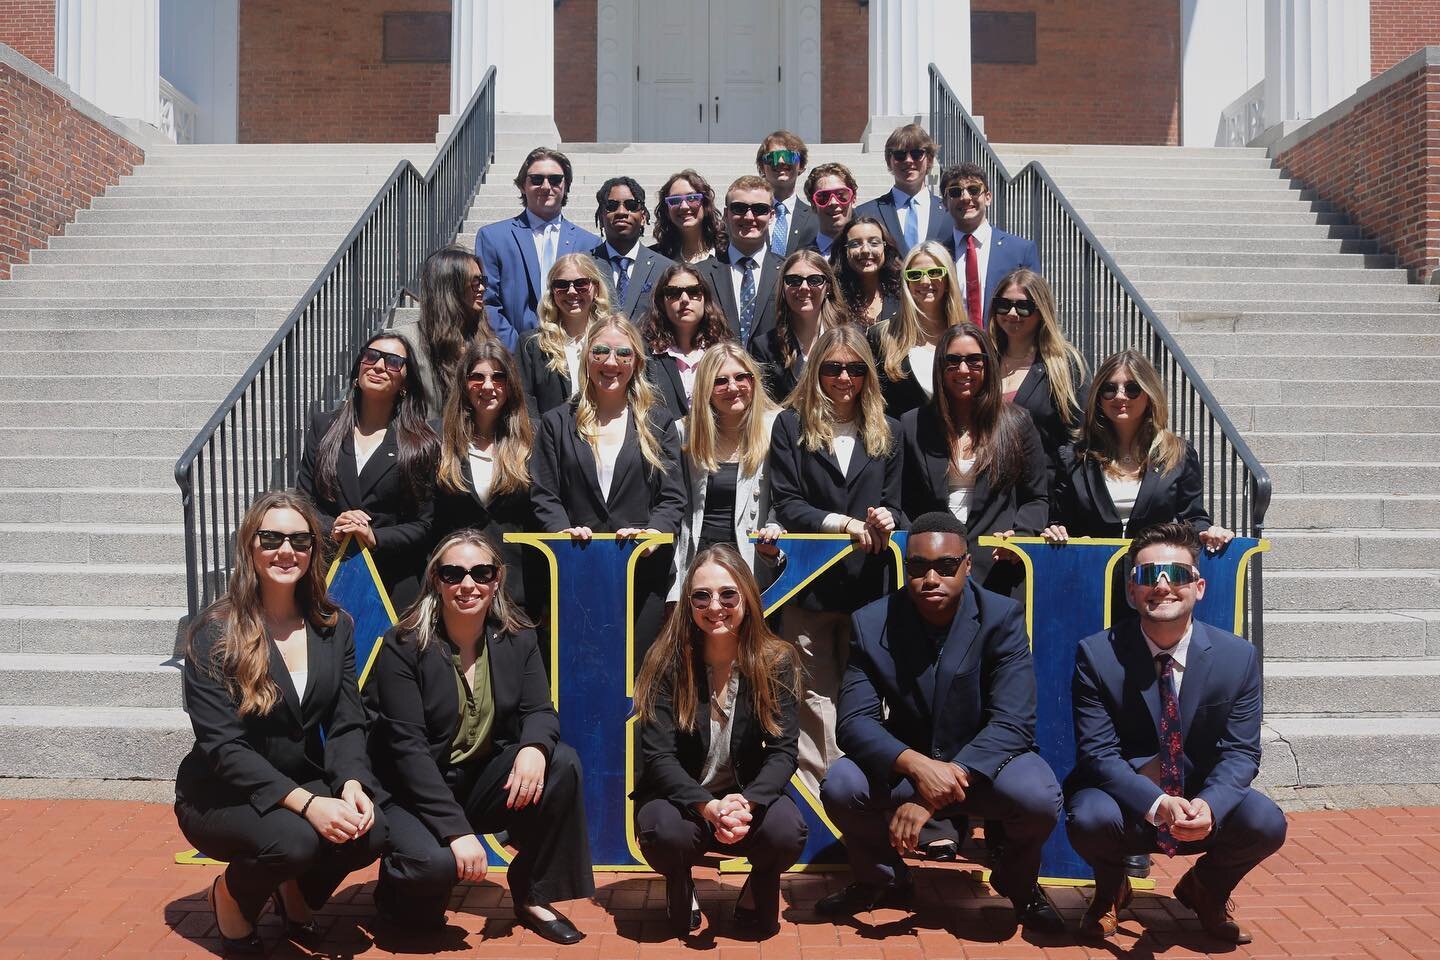 This past weekend we had the pleasure of officially welcoming our newest pledge class, the Alpha Deltas, to our brotherhood! We are so excited to see what the future has in store for you all!😇